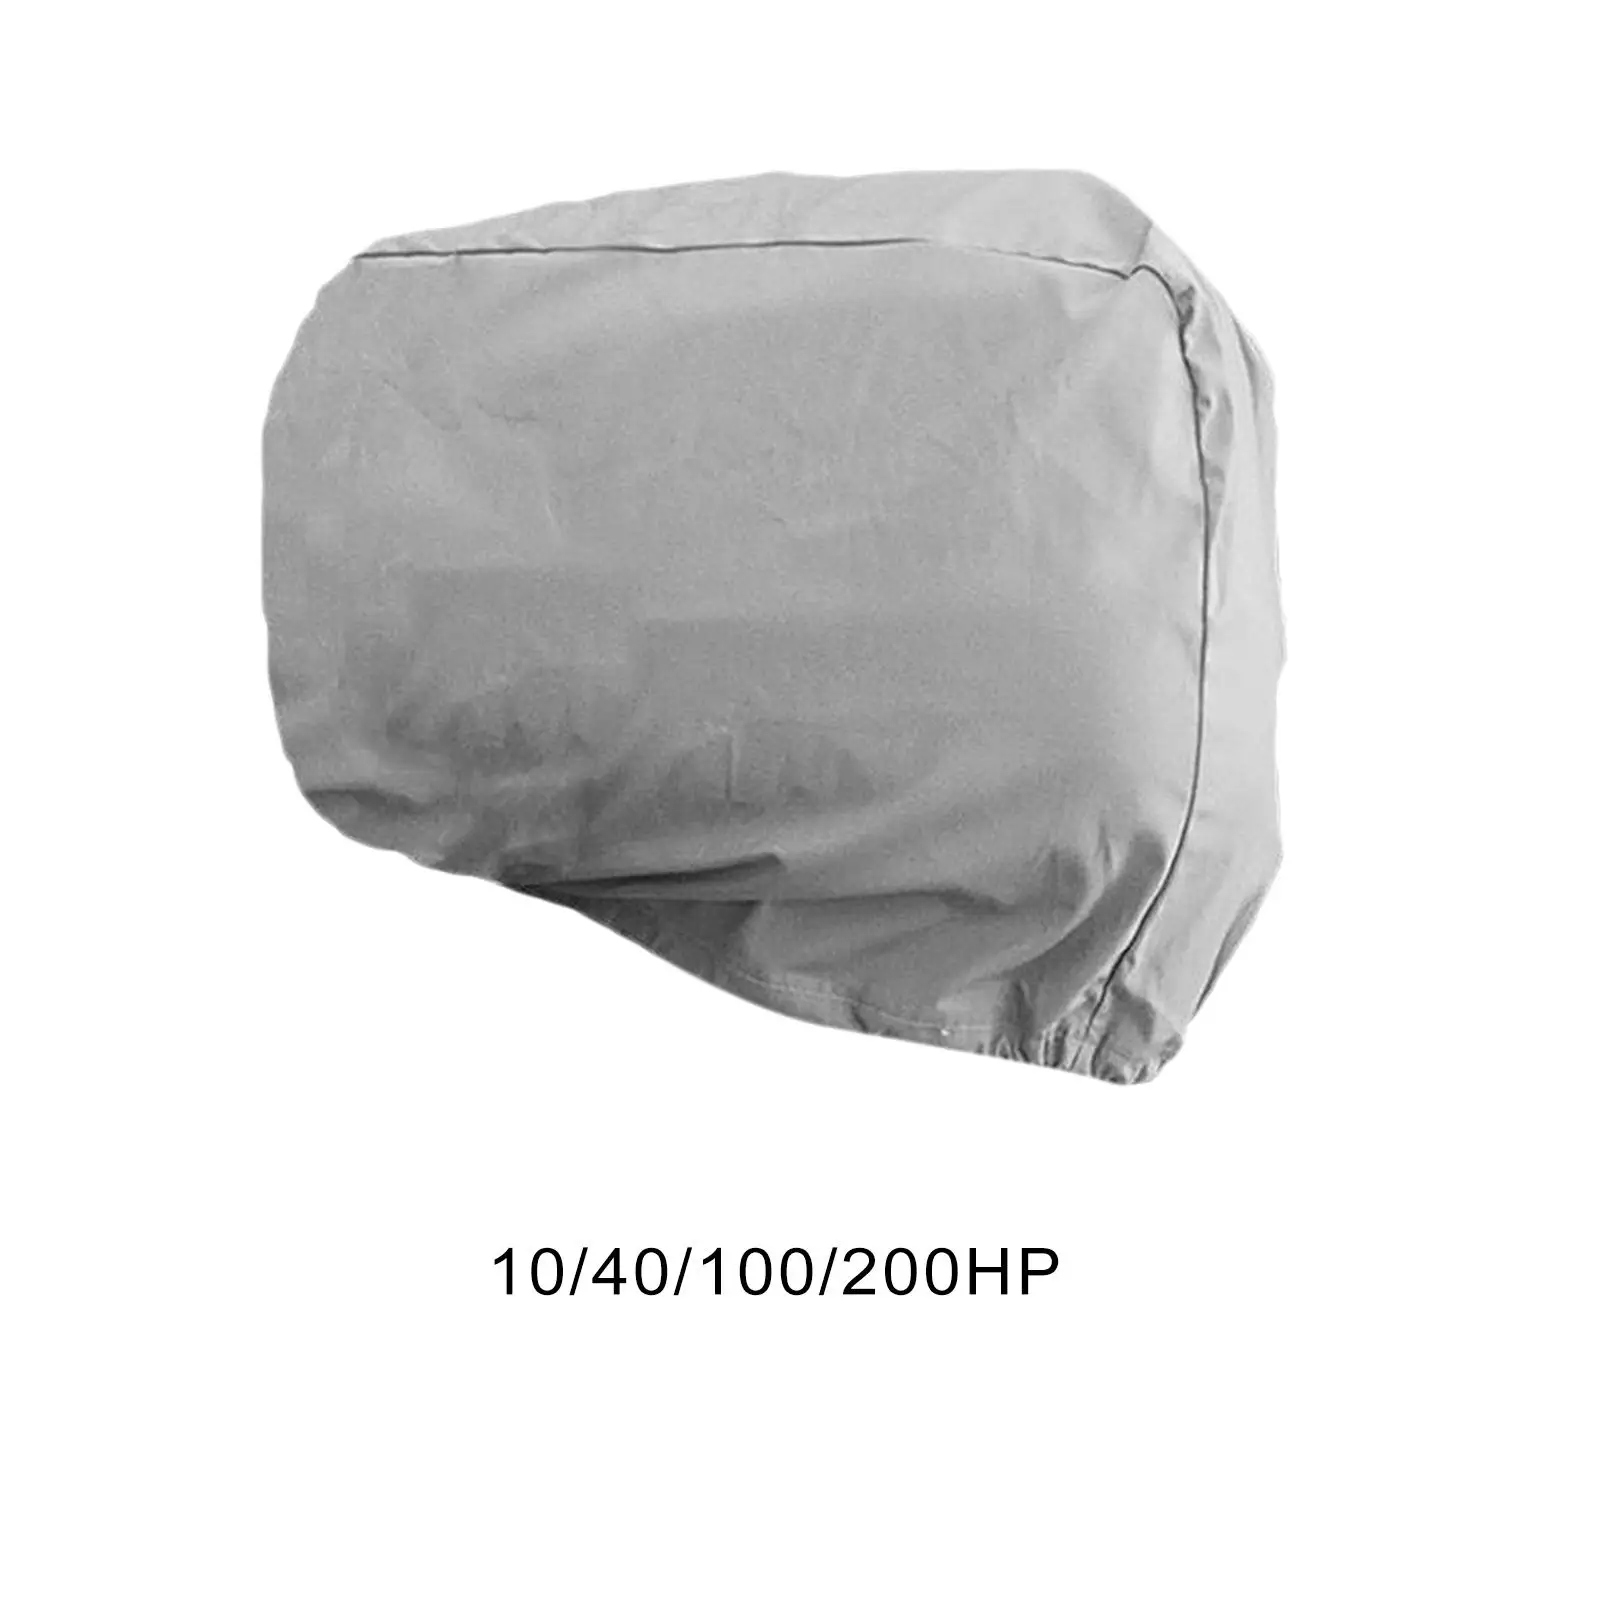 Outboard Motor Cover, Heavy Duty Oxford WeatherBoat  Covers for Sea